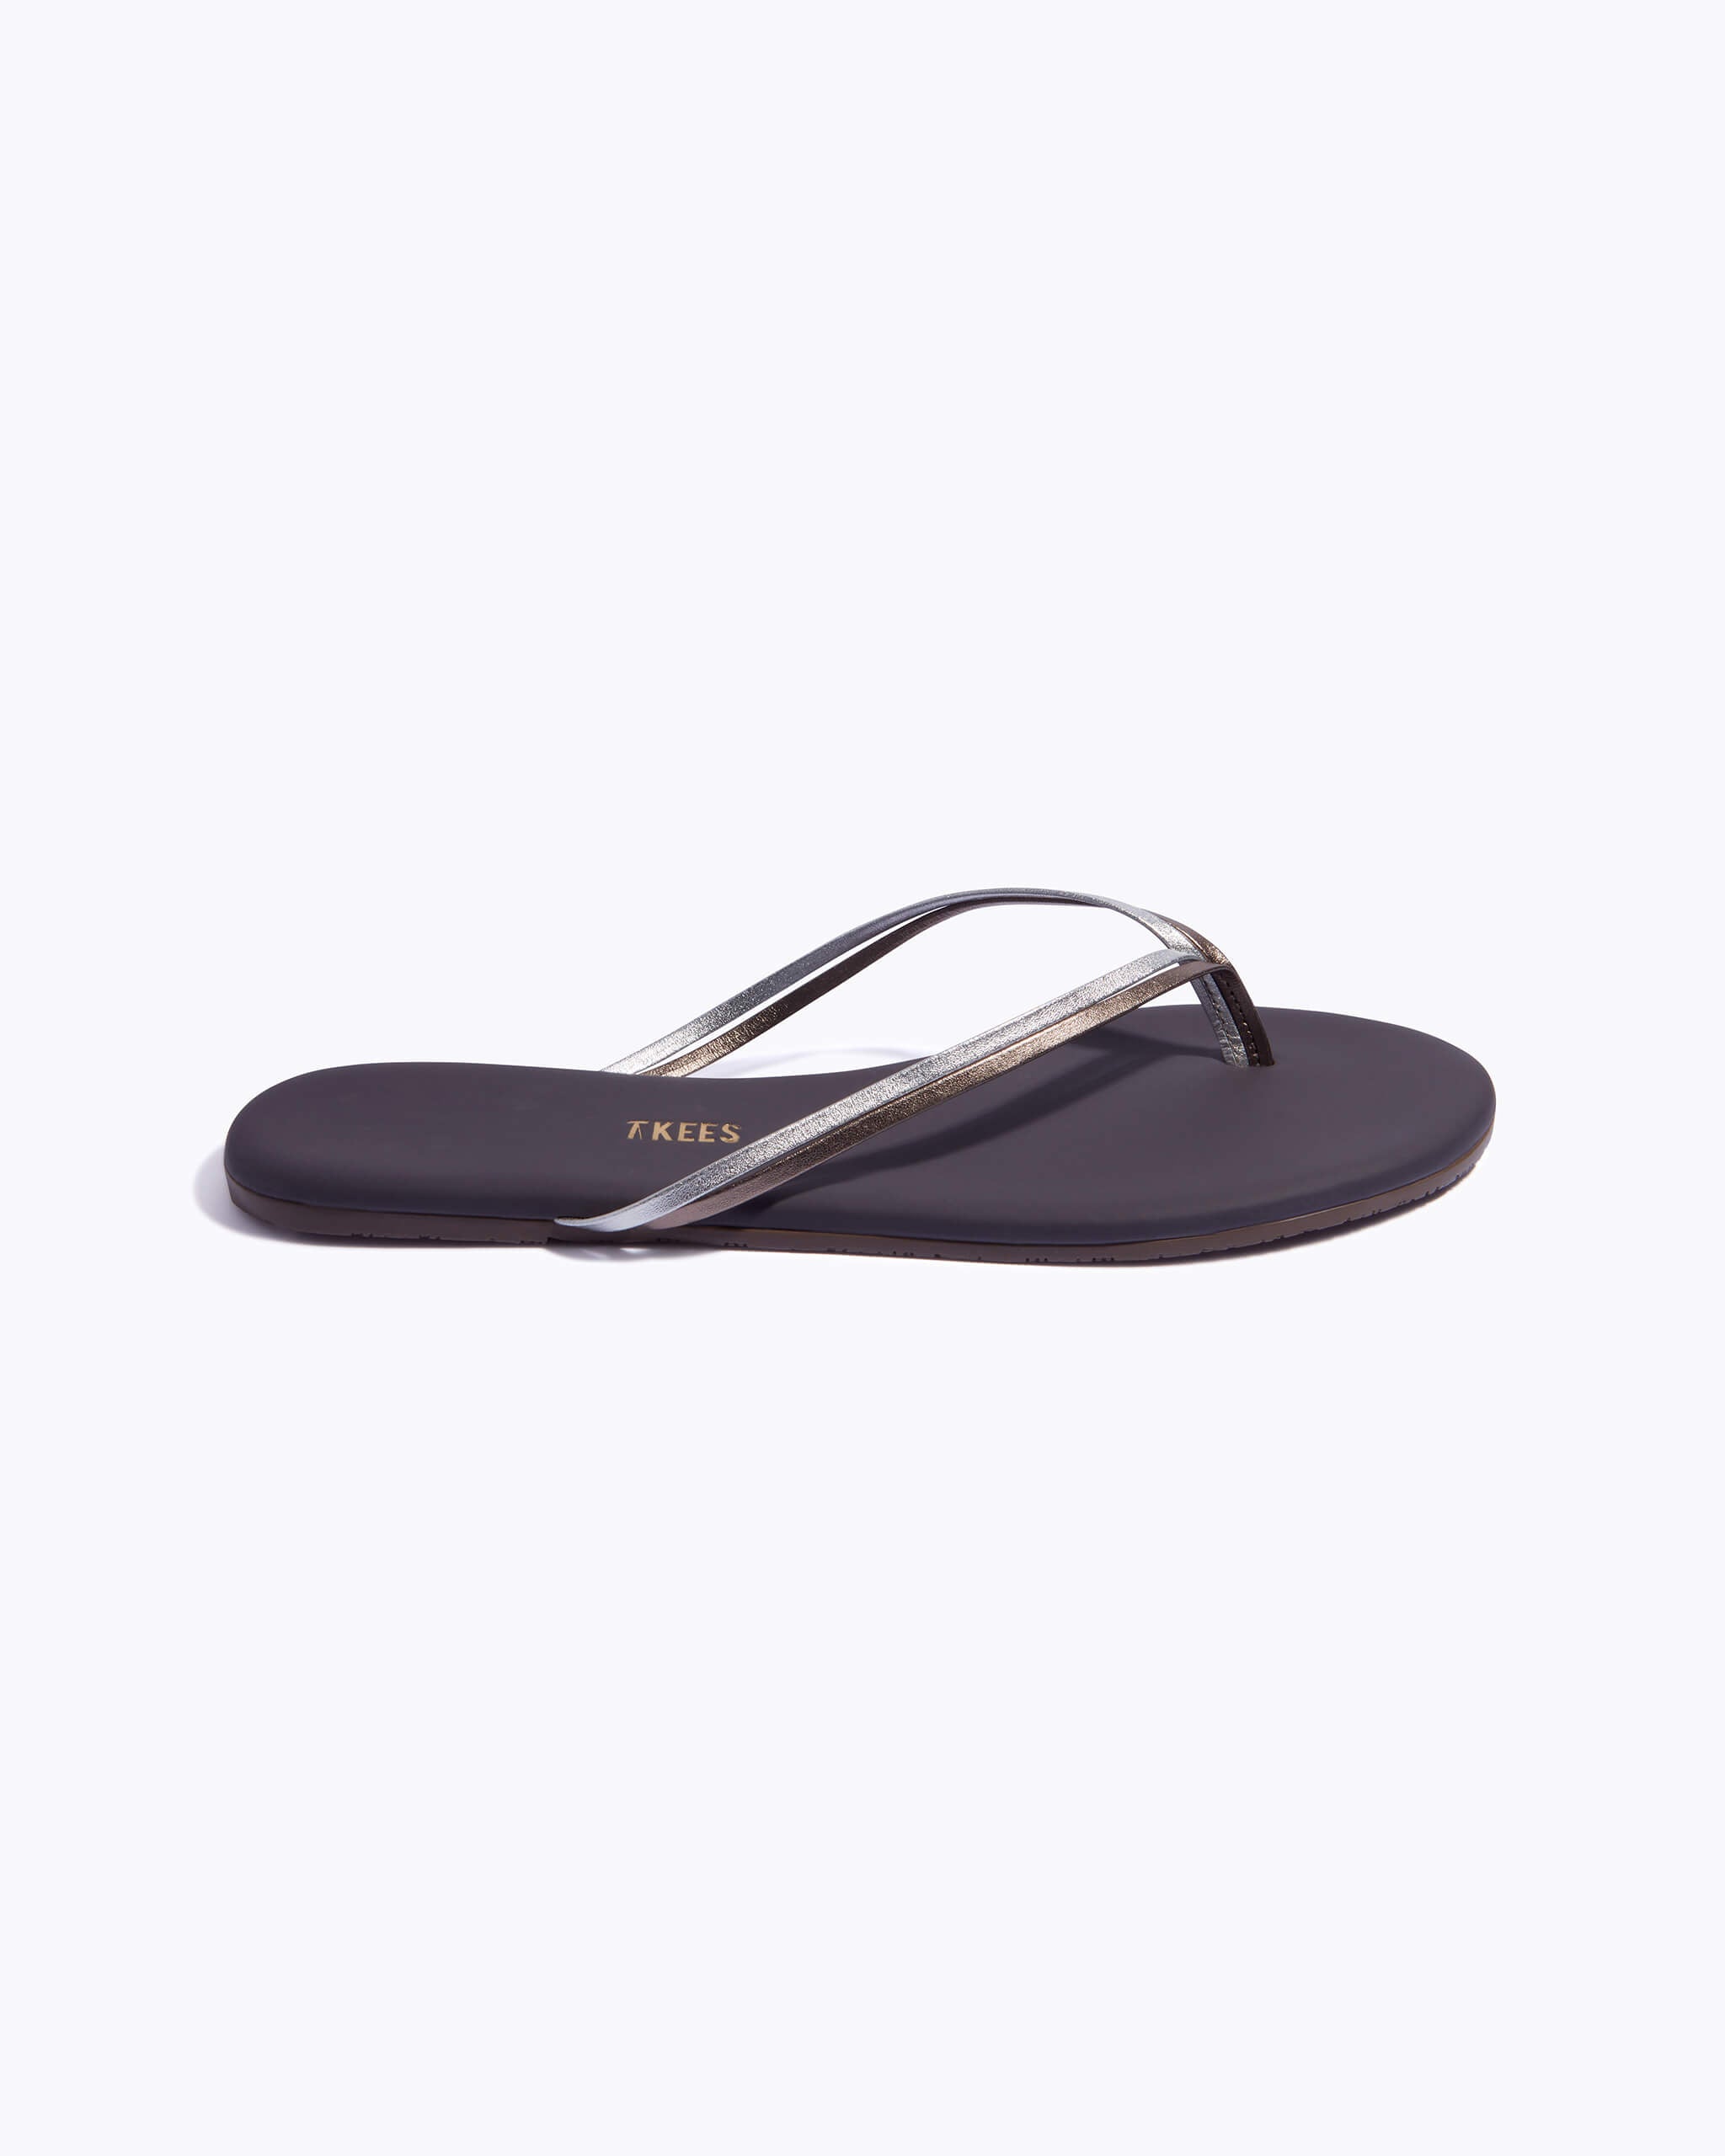 Silver Showers | Leather Flip Flops | TKEES Duos